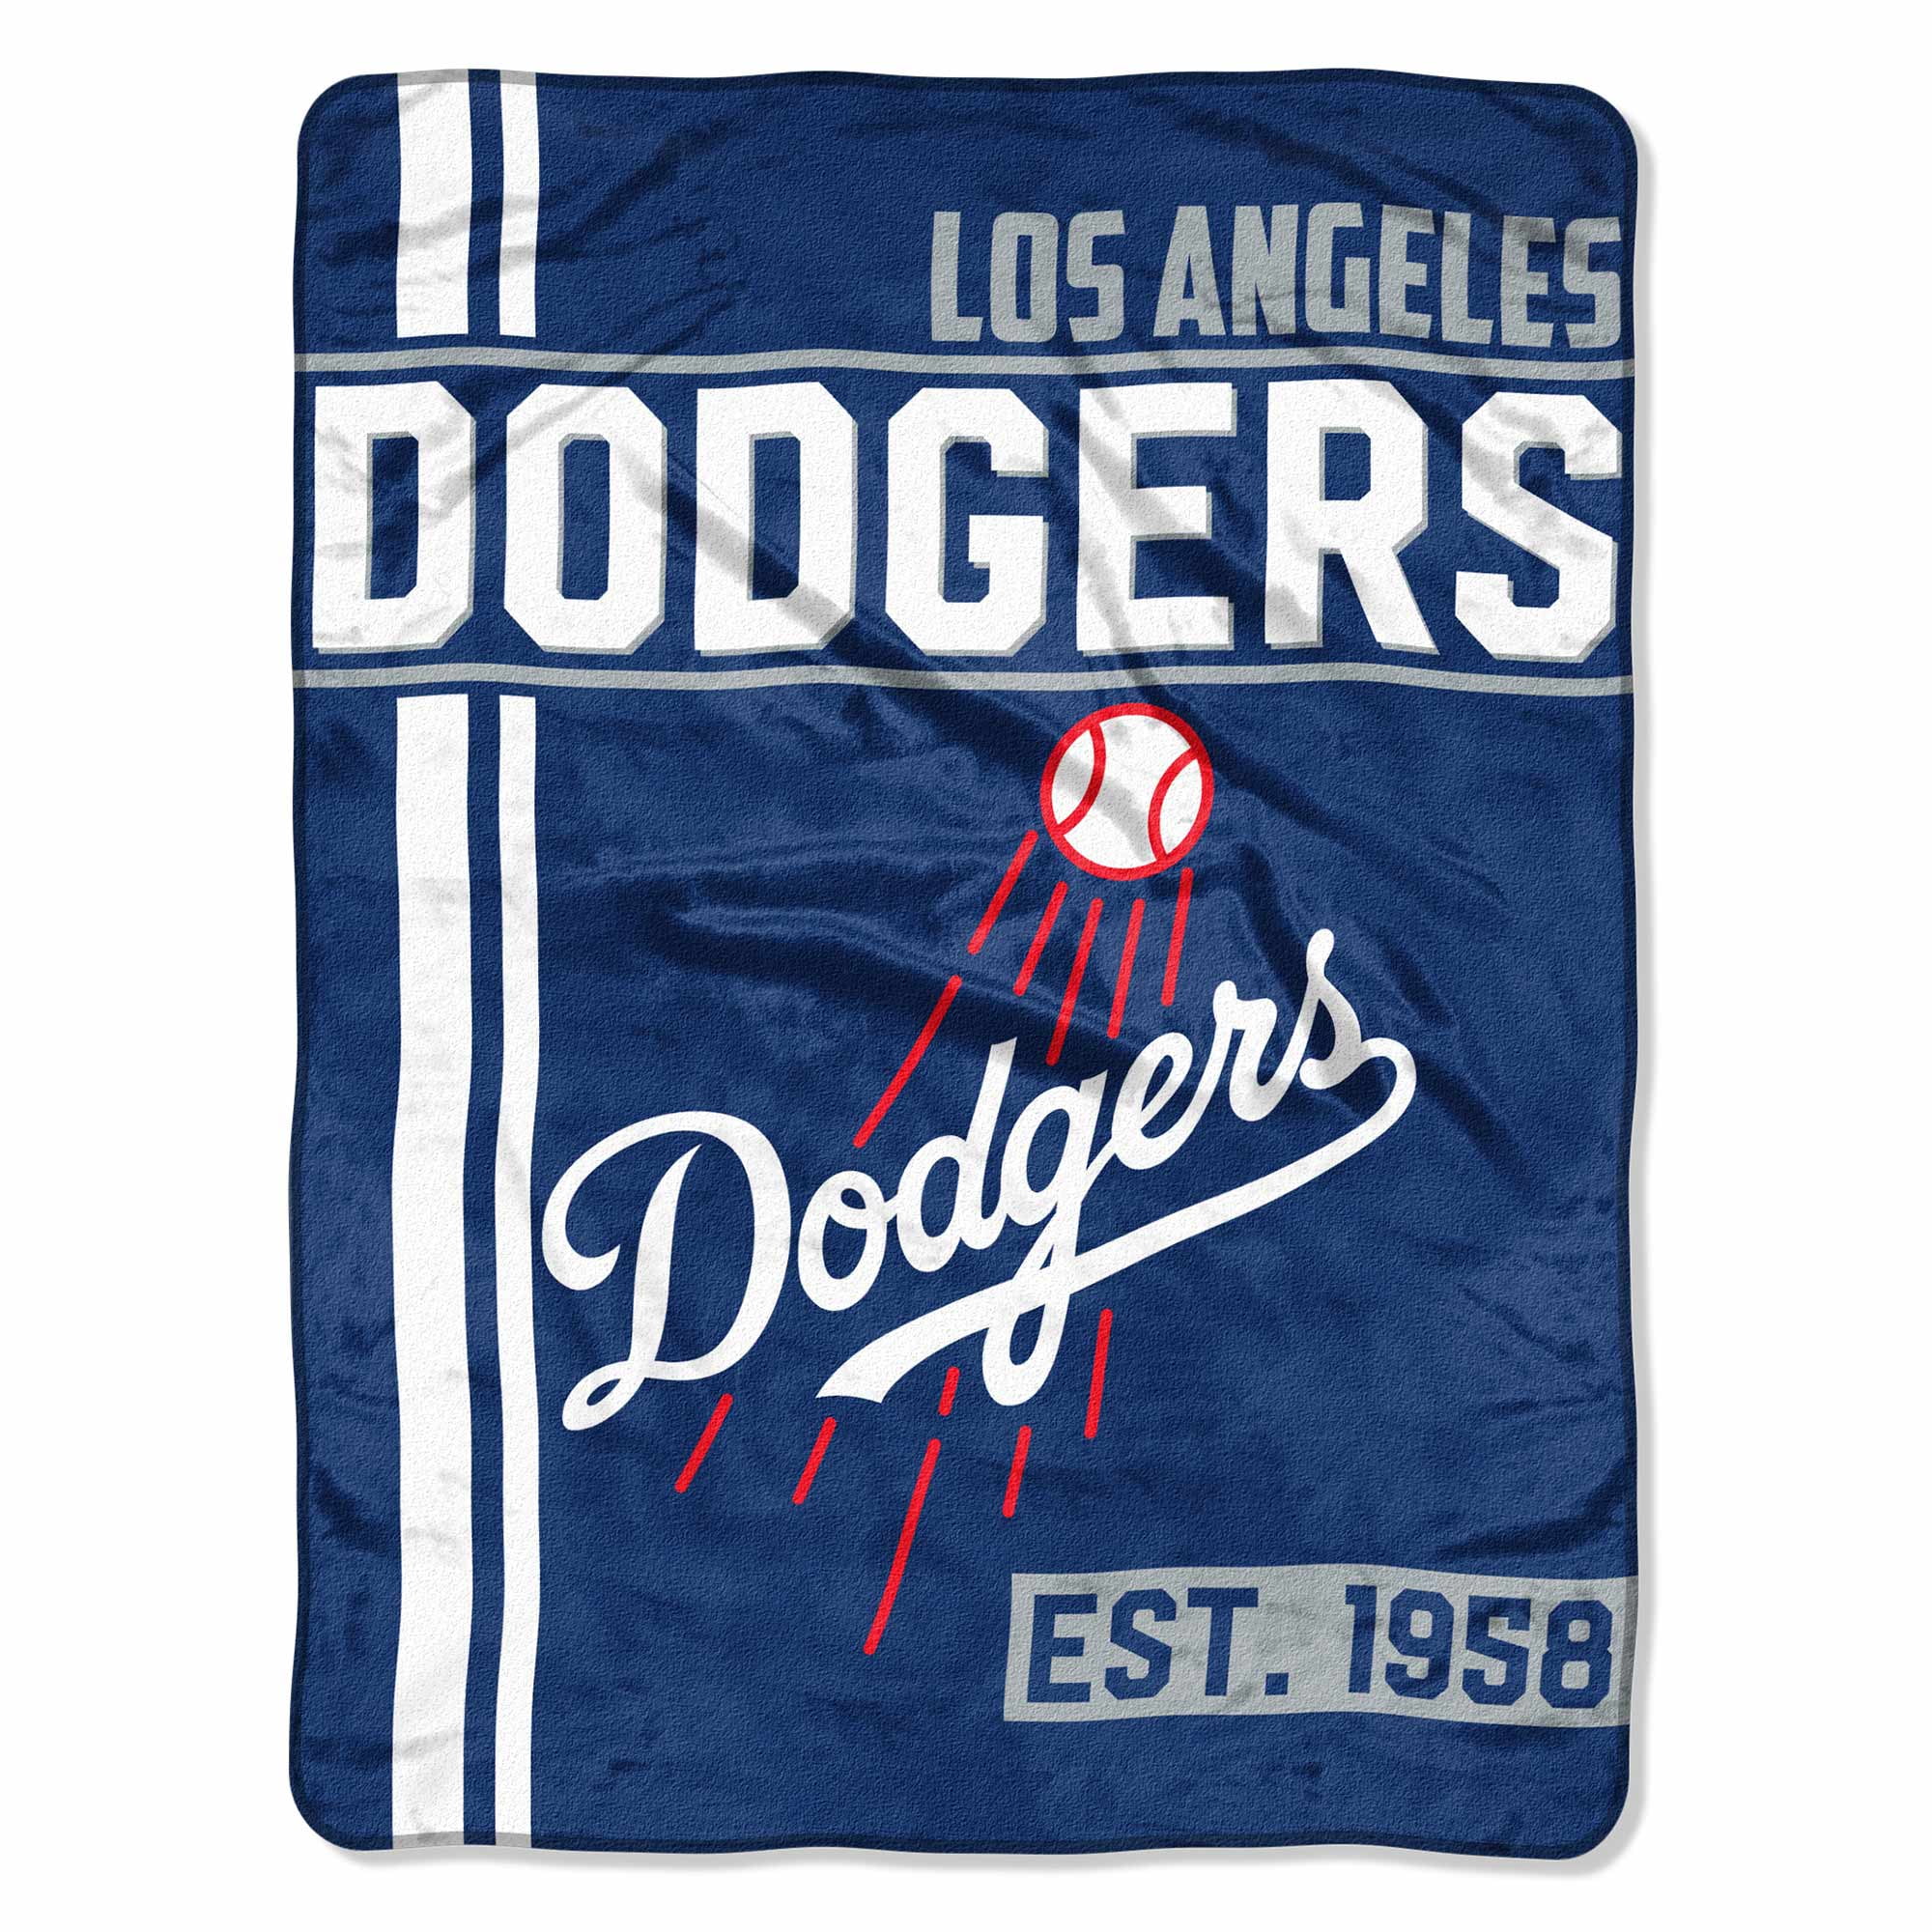 dodgers store near me